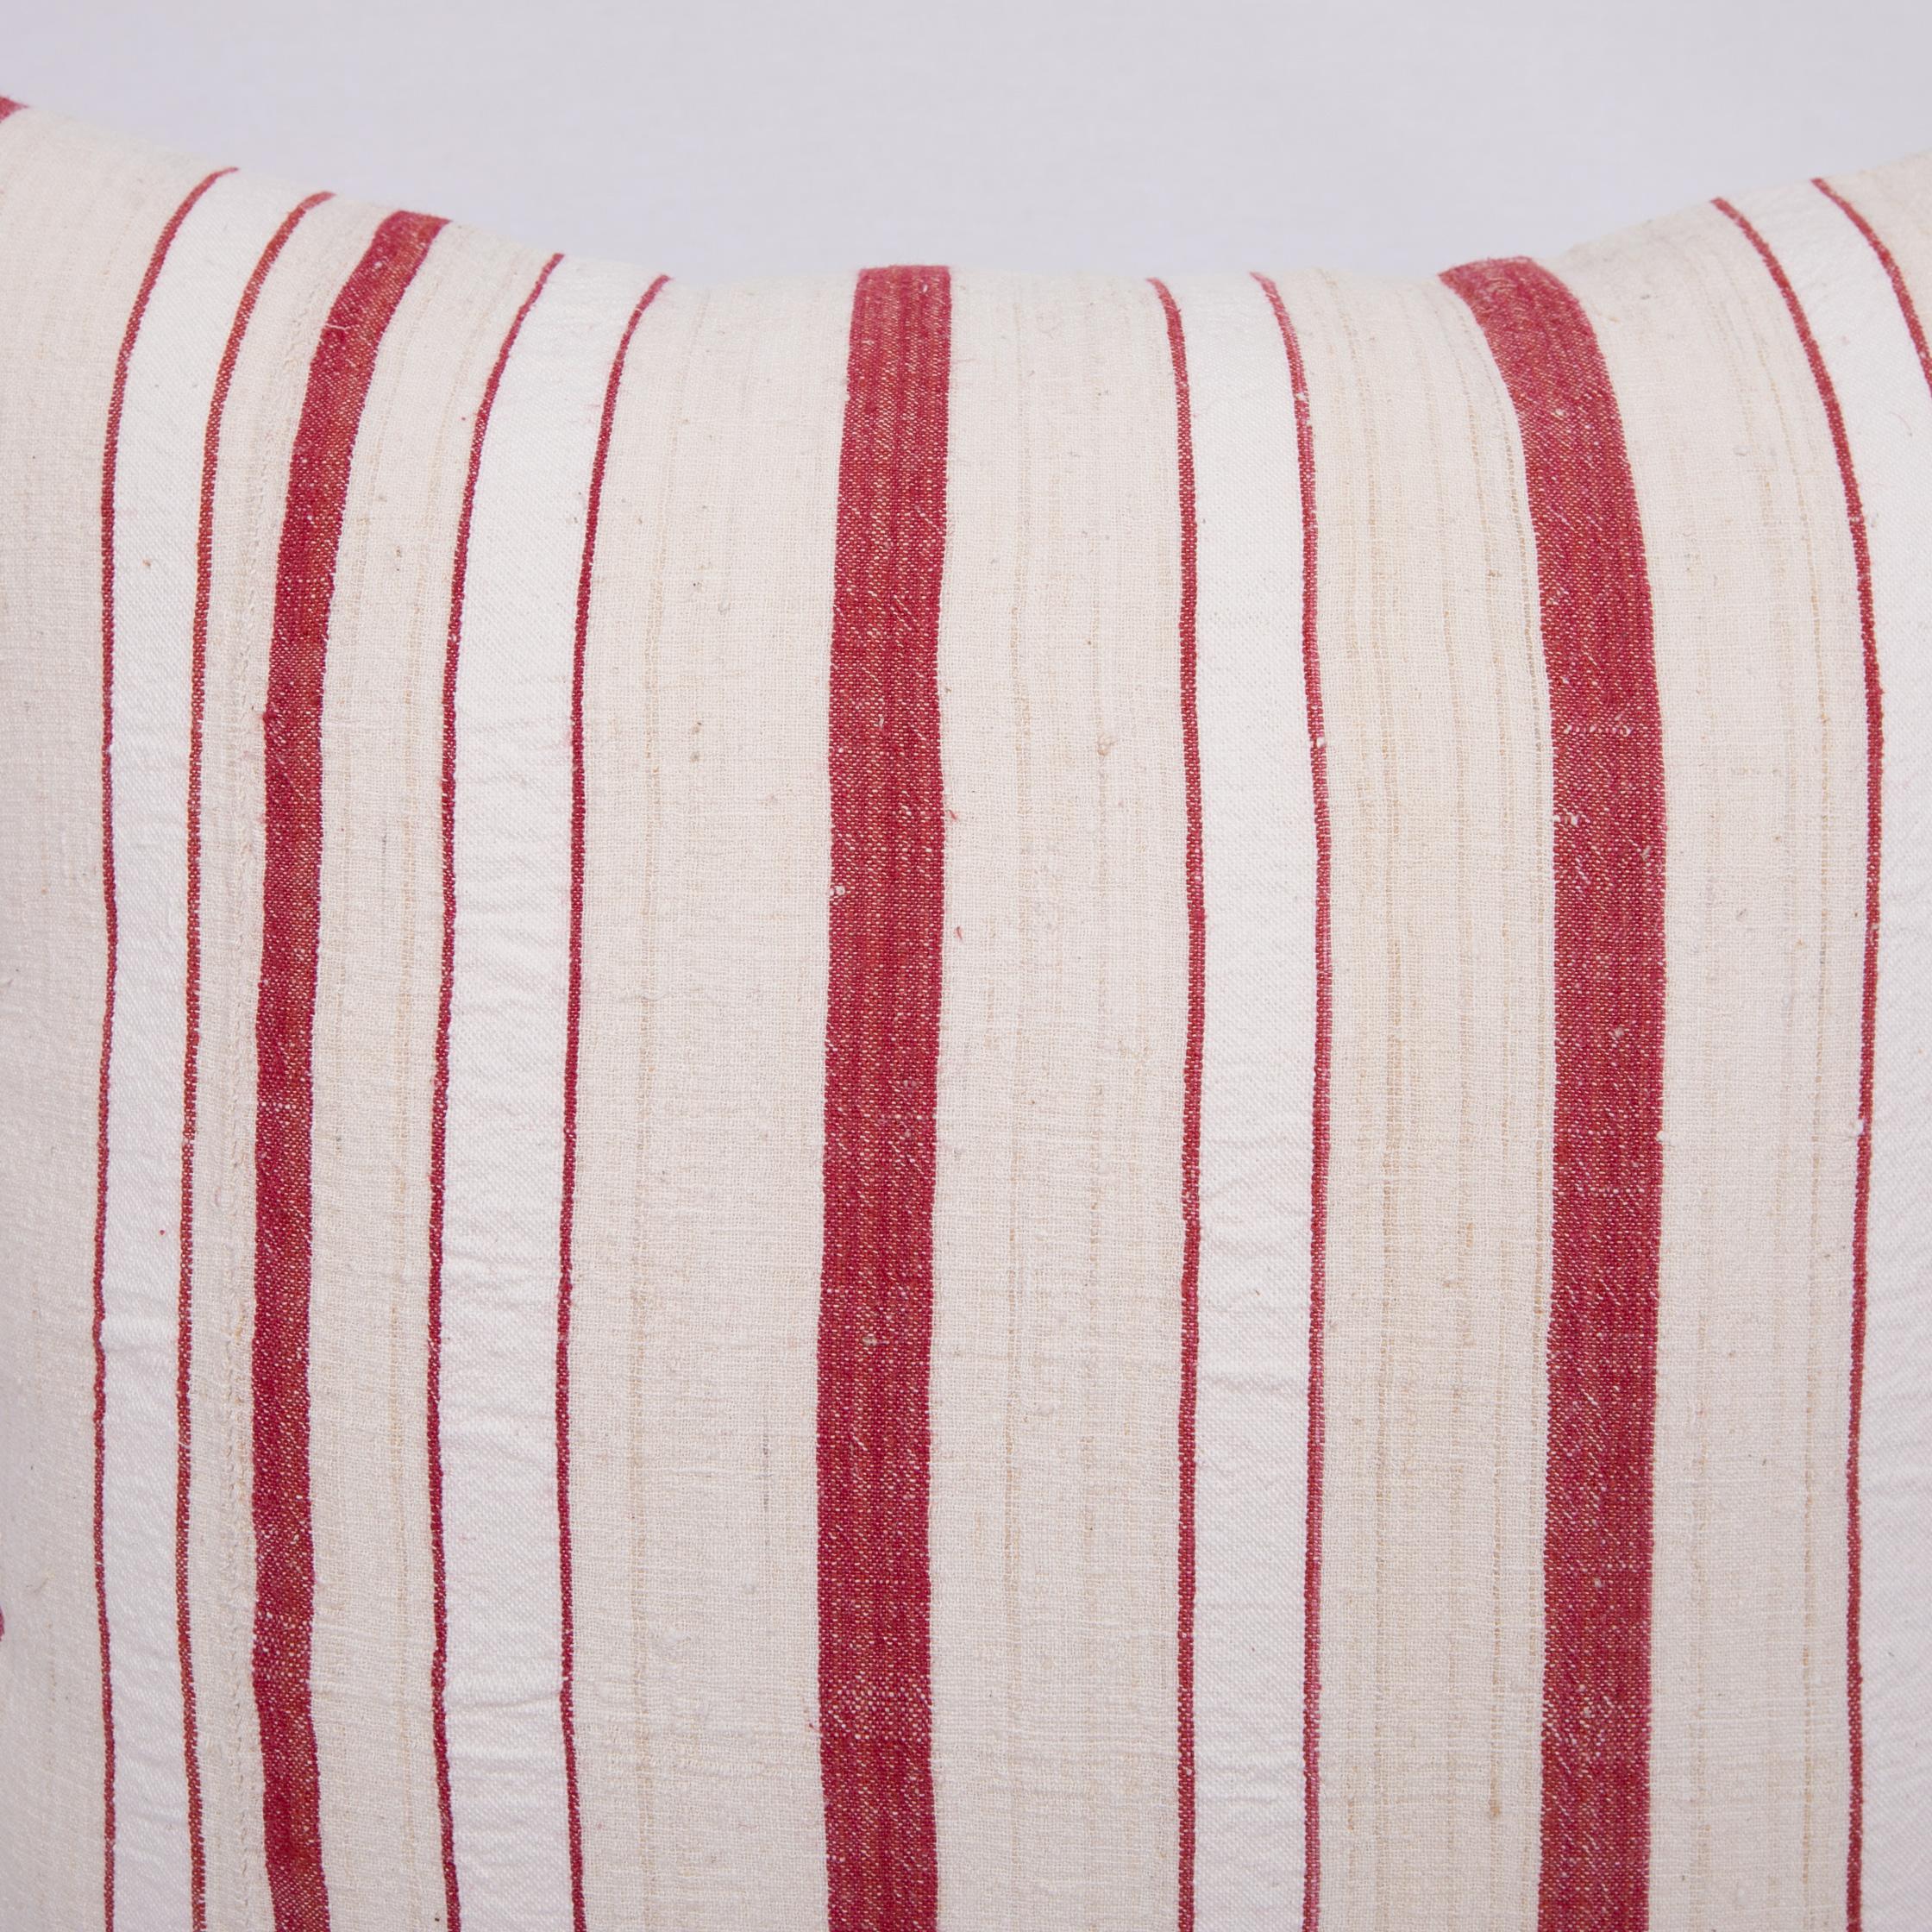 Hand-Woven Pillow Case Fashioned from an Anatolian Vintage Cotton Fabric, 1960s For Sale